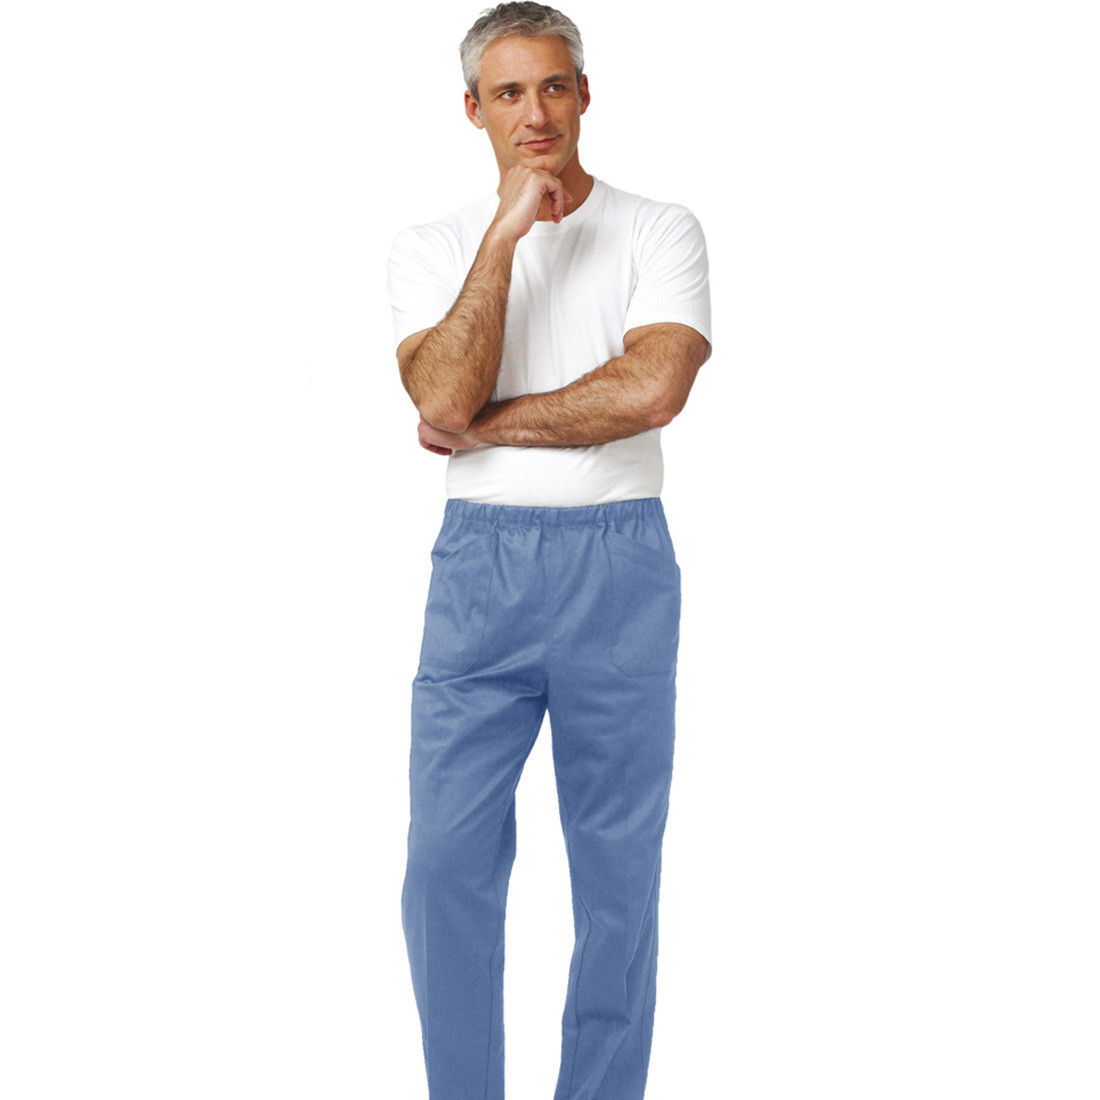 STAR I unisex medical trousers - Safetywear